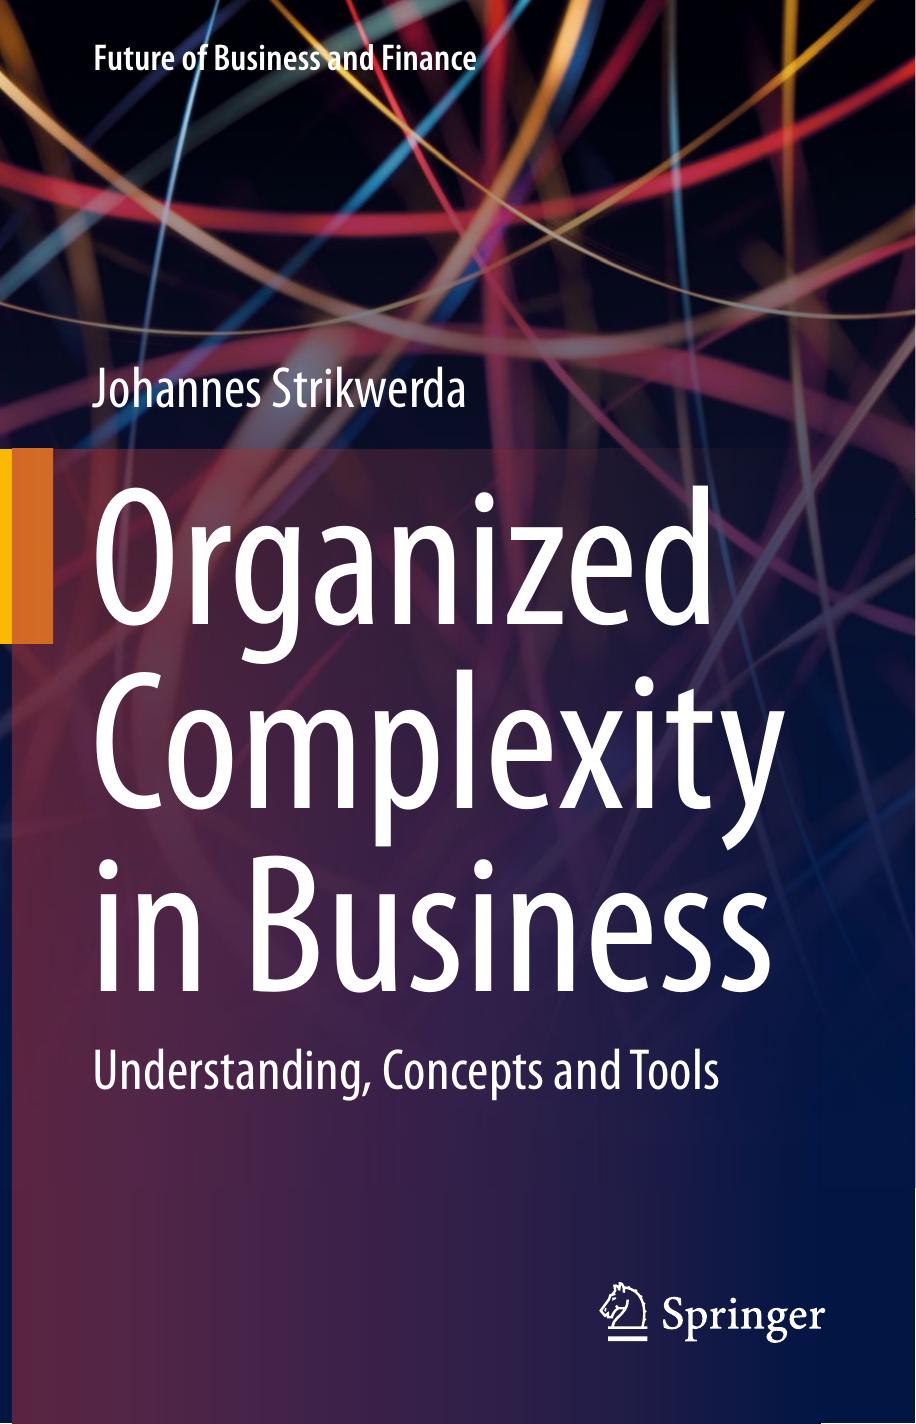 Organized Complexity in Business: Understanding, Concepts and Tools by Johannes Strikwerda